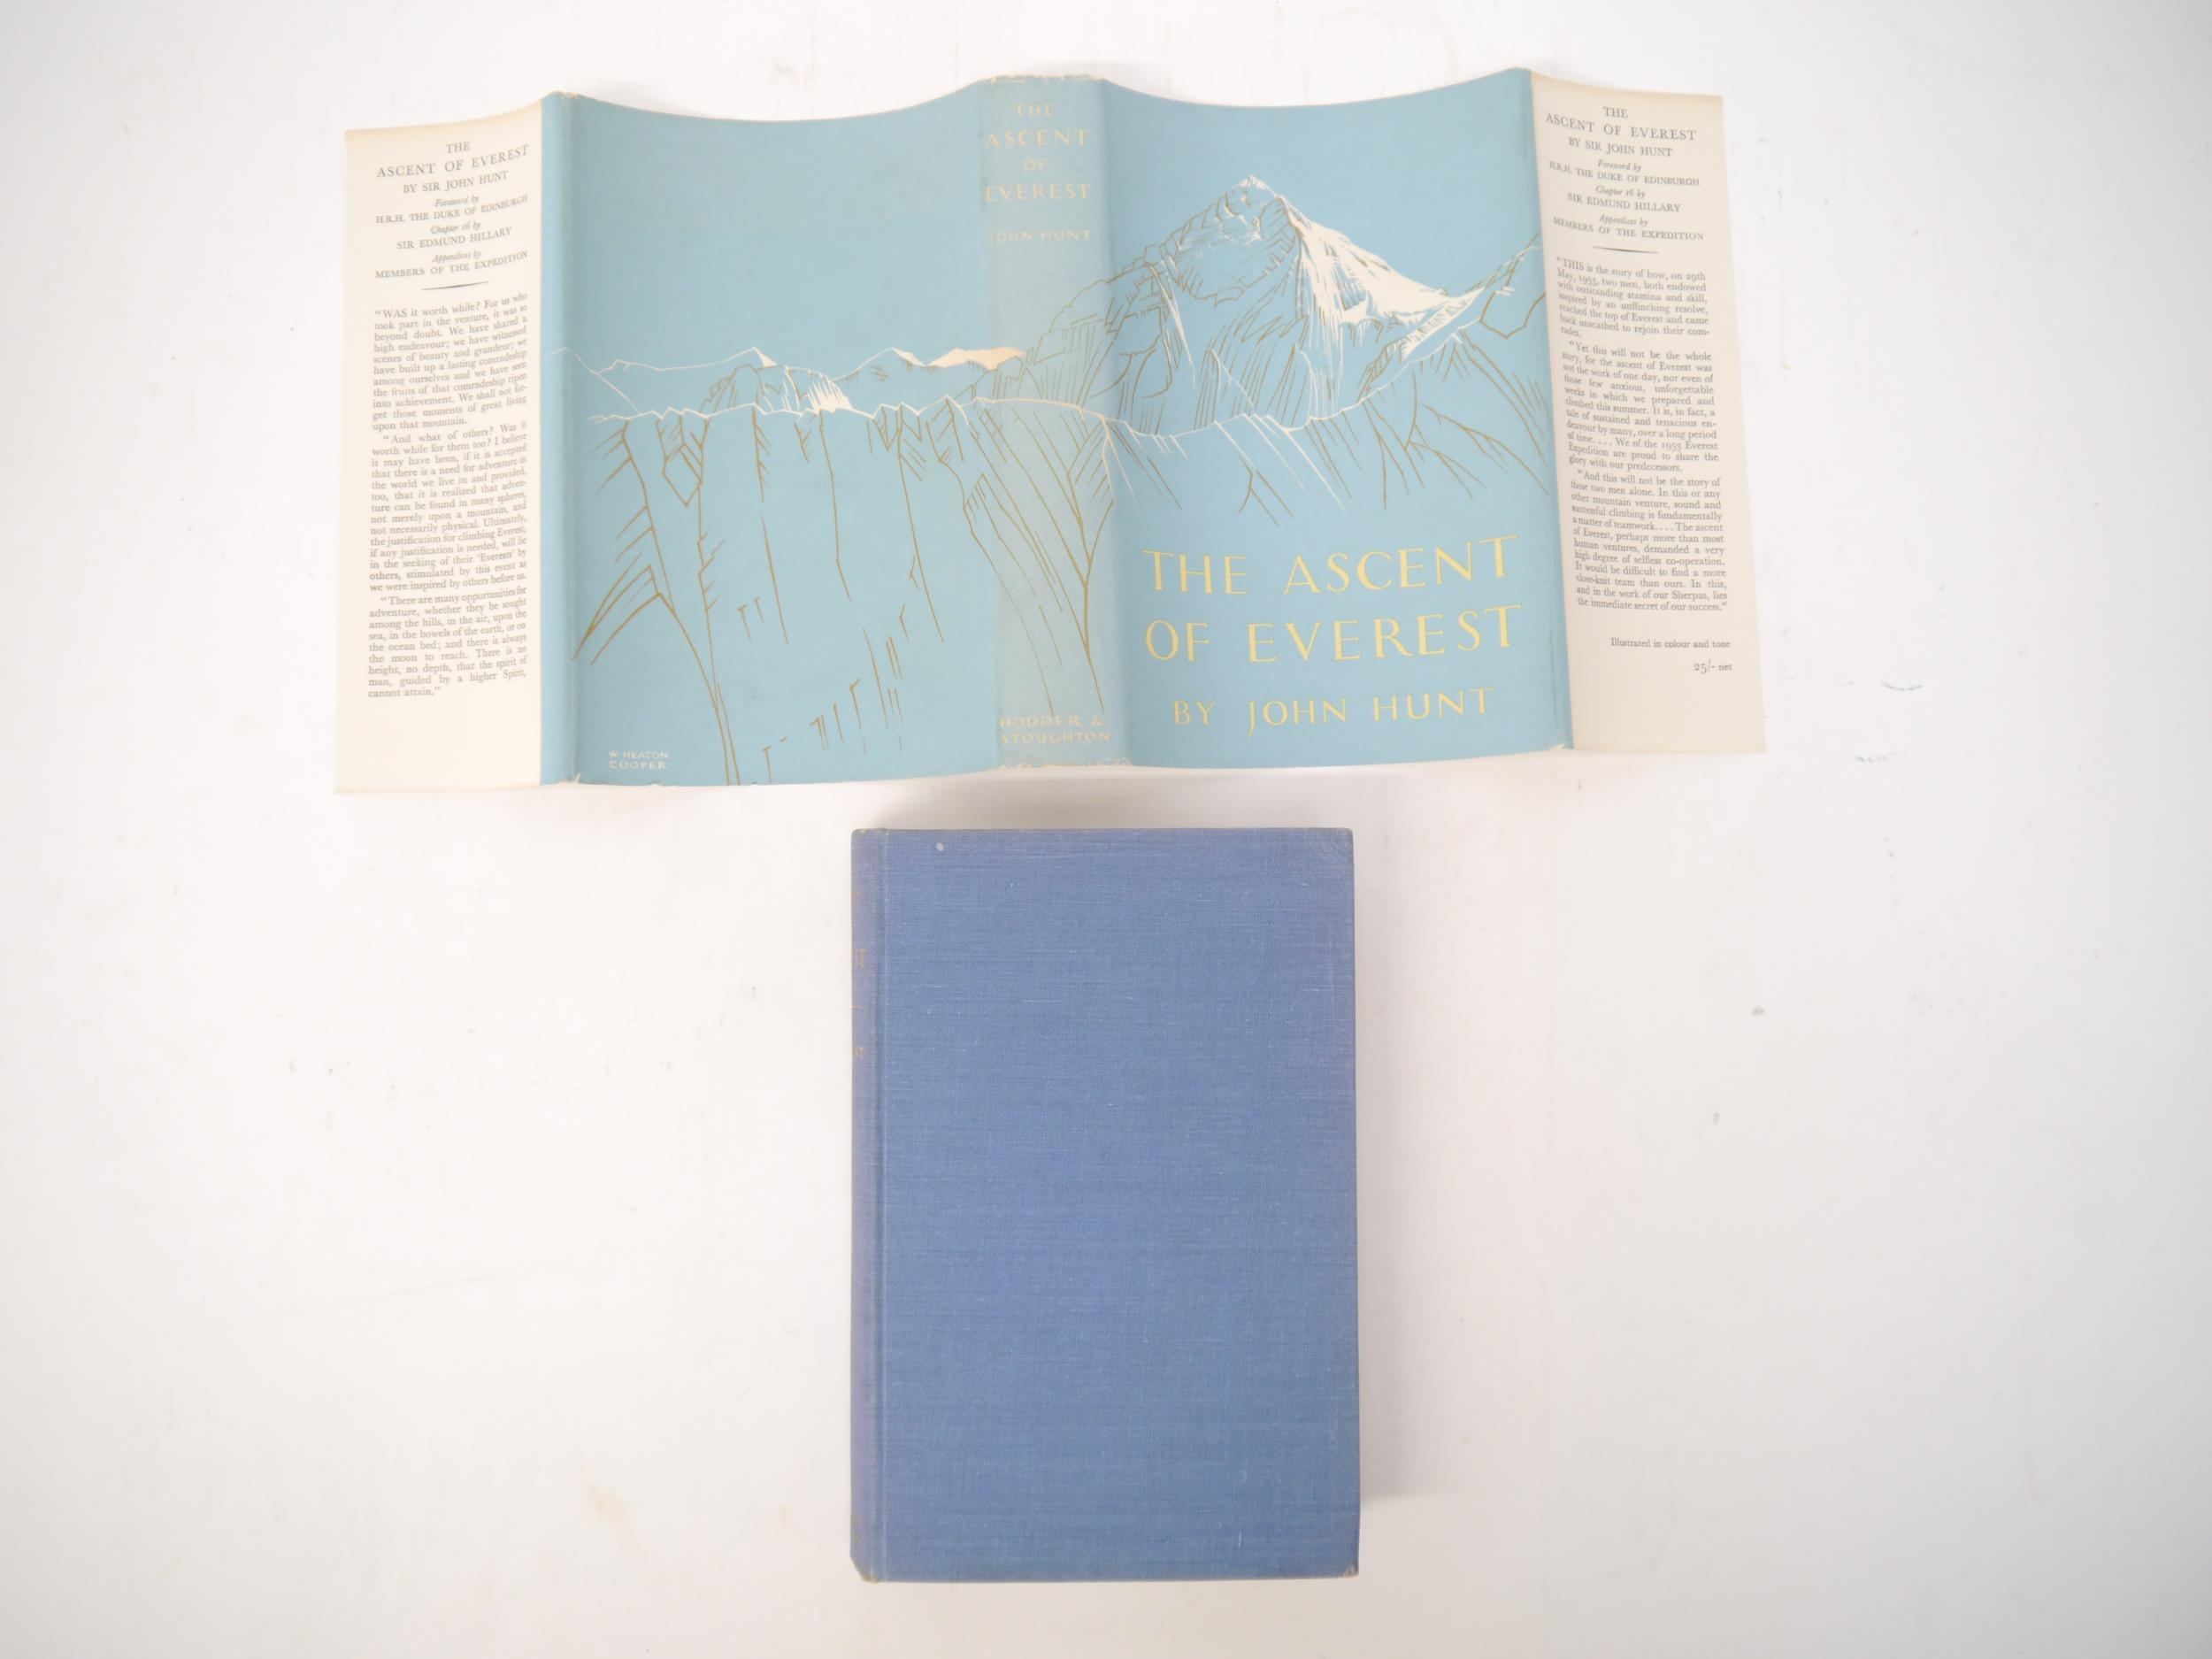 John Hunt: 'The Ascent of Everest', London, Hodder & Stoughton, 1953, 1st edition, signed by the - Image 4 of 4